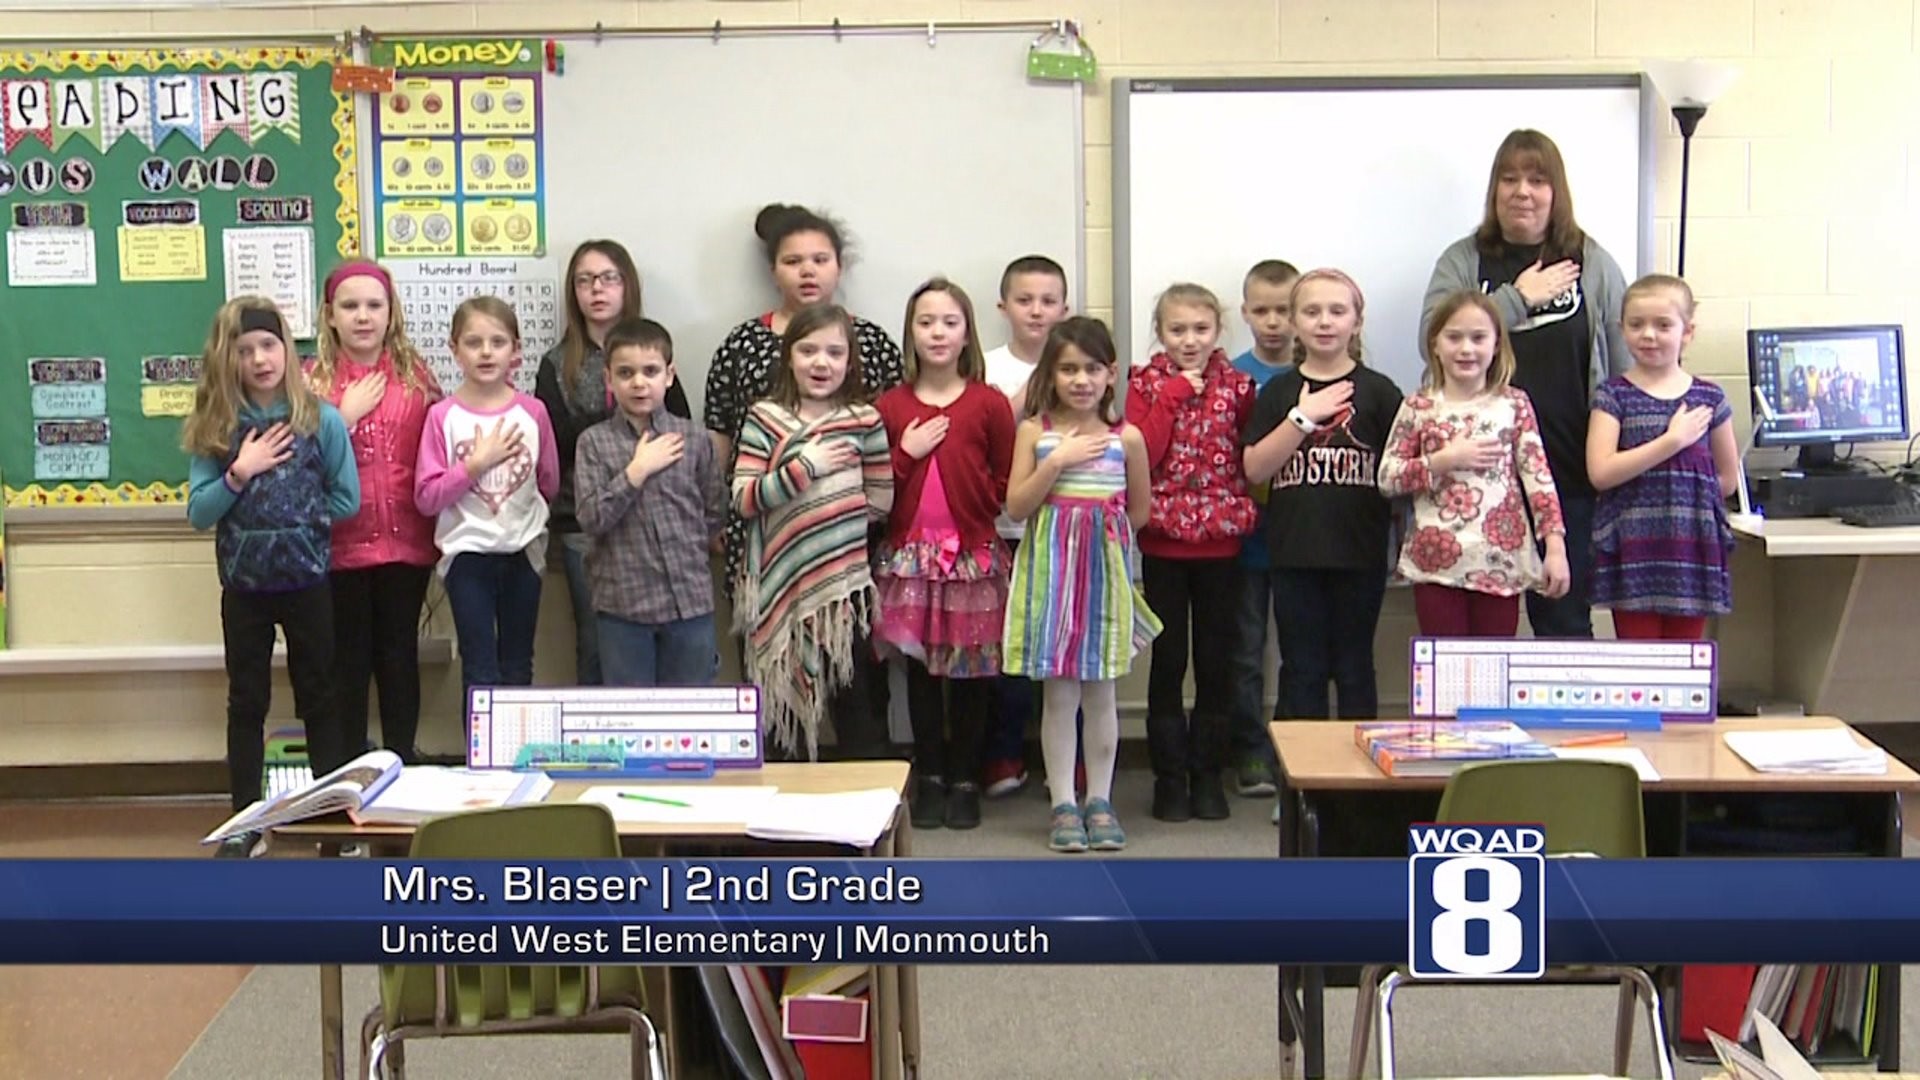 The Pledge from Mrs. Blaser`s class at Monmouth United West Elementary